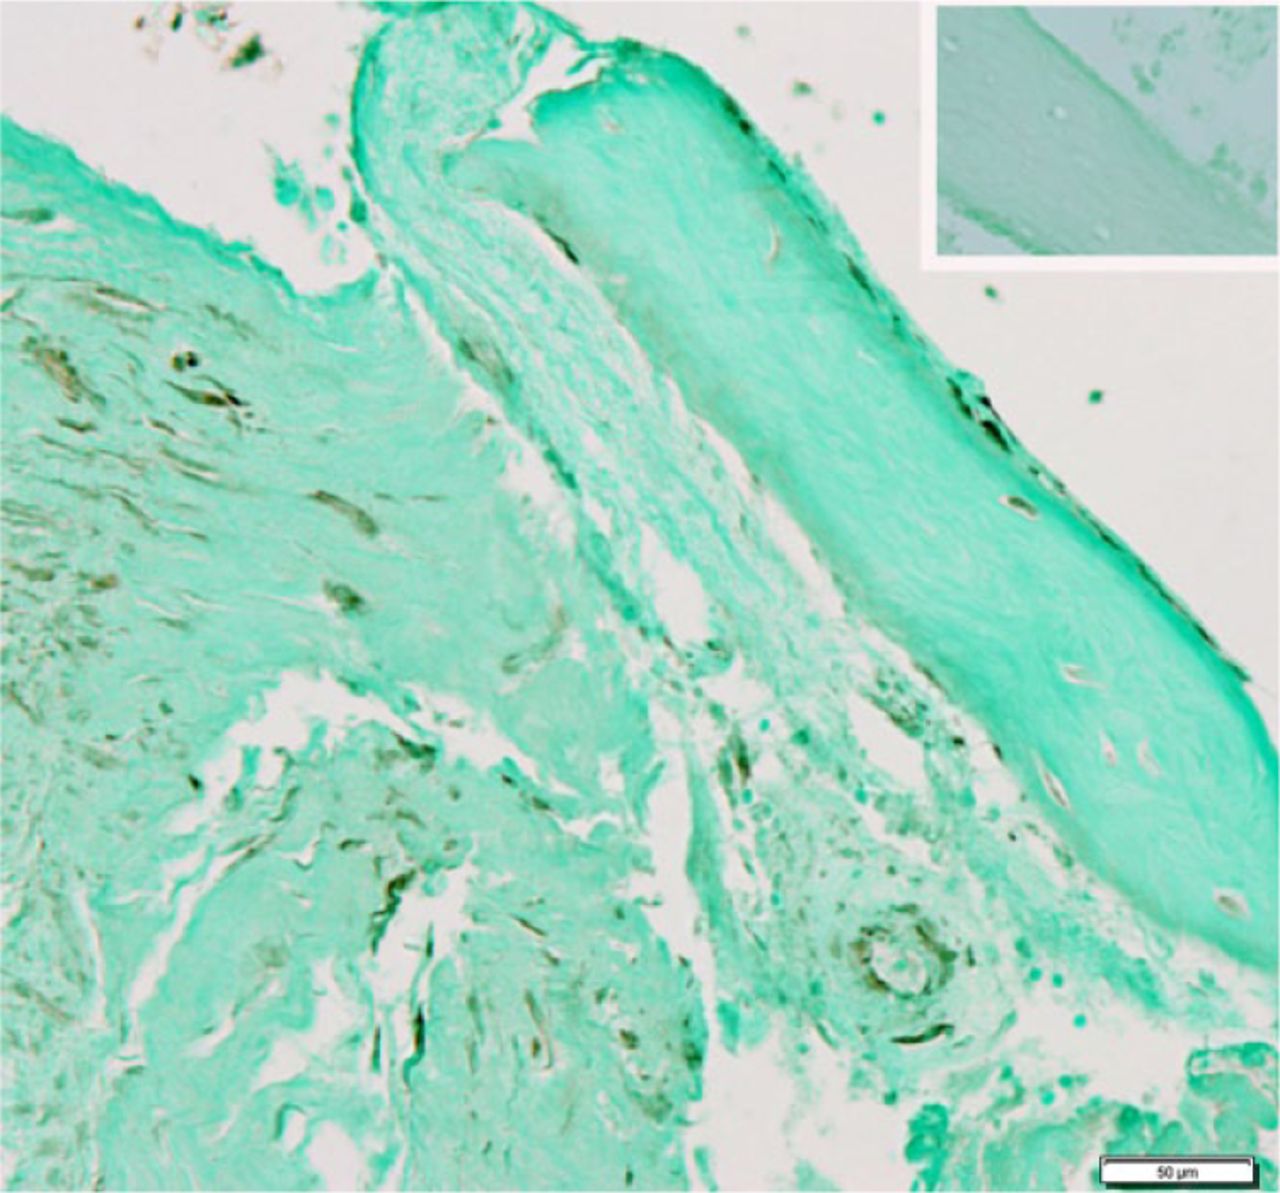 Fig. 3 
            Immunohistochemical localisation of bone morphogenetic protein 2 in the biomembrane. Insert upper right shows an adjacent section processed as a negative control (Bar = 50 µm).
          